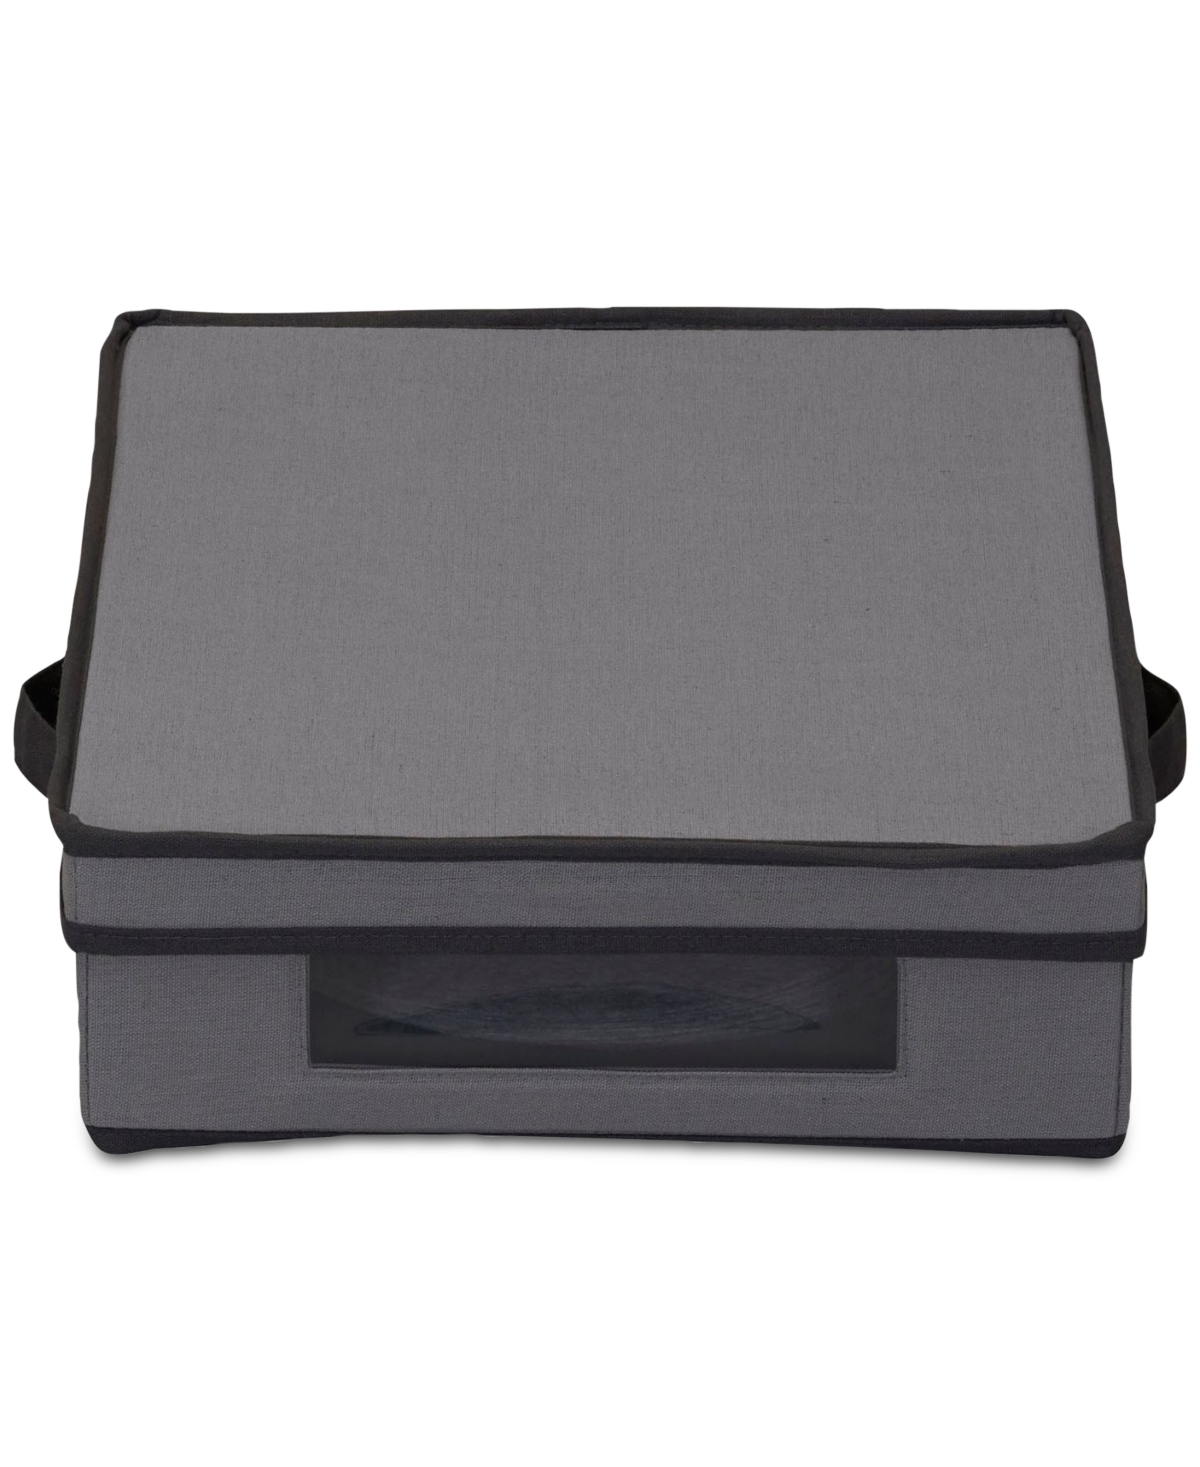 Household Essentials Charger Plate Storage Box In Gray